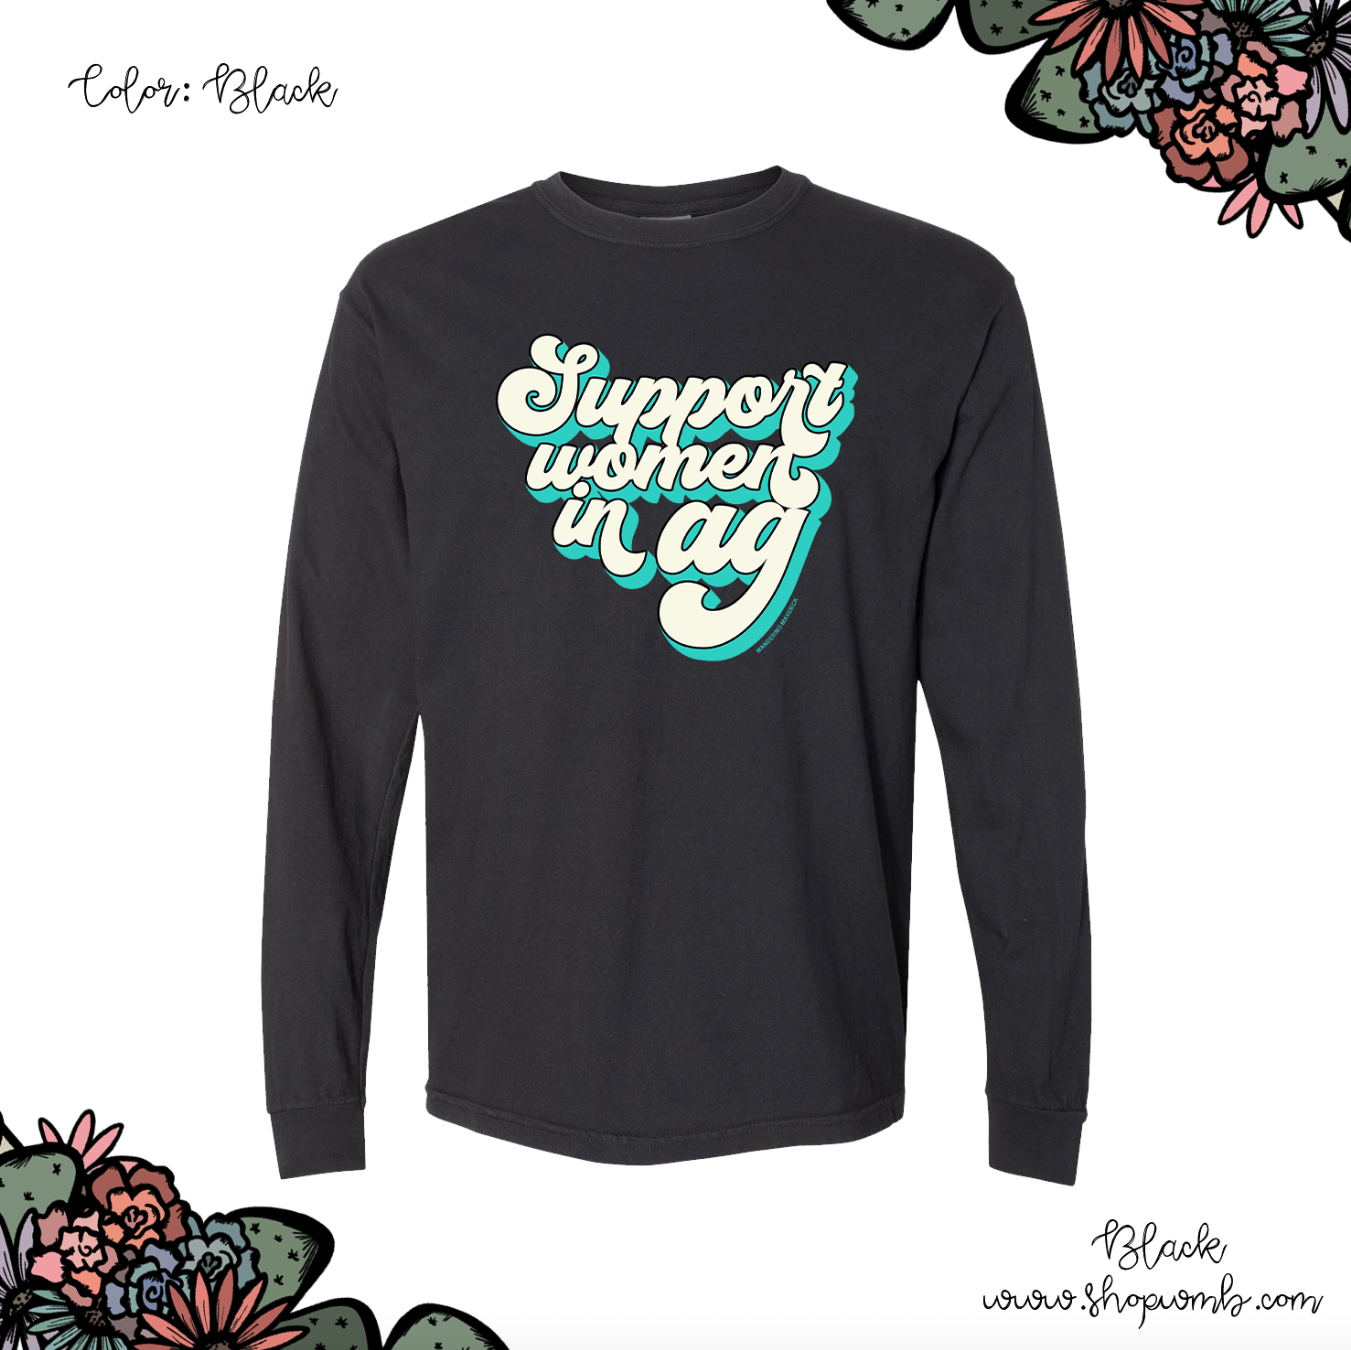 Retro Support Women In Ag Turquoise LONG SLEEVE T-Shirt (S-3XL) - Multiple Colors!